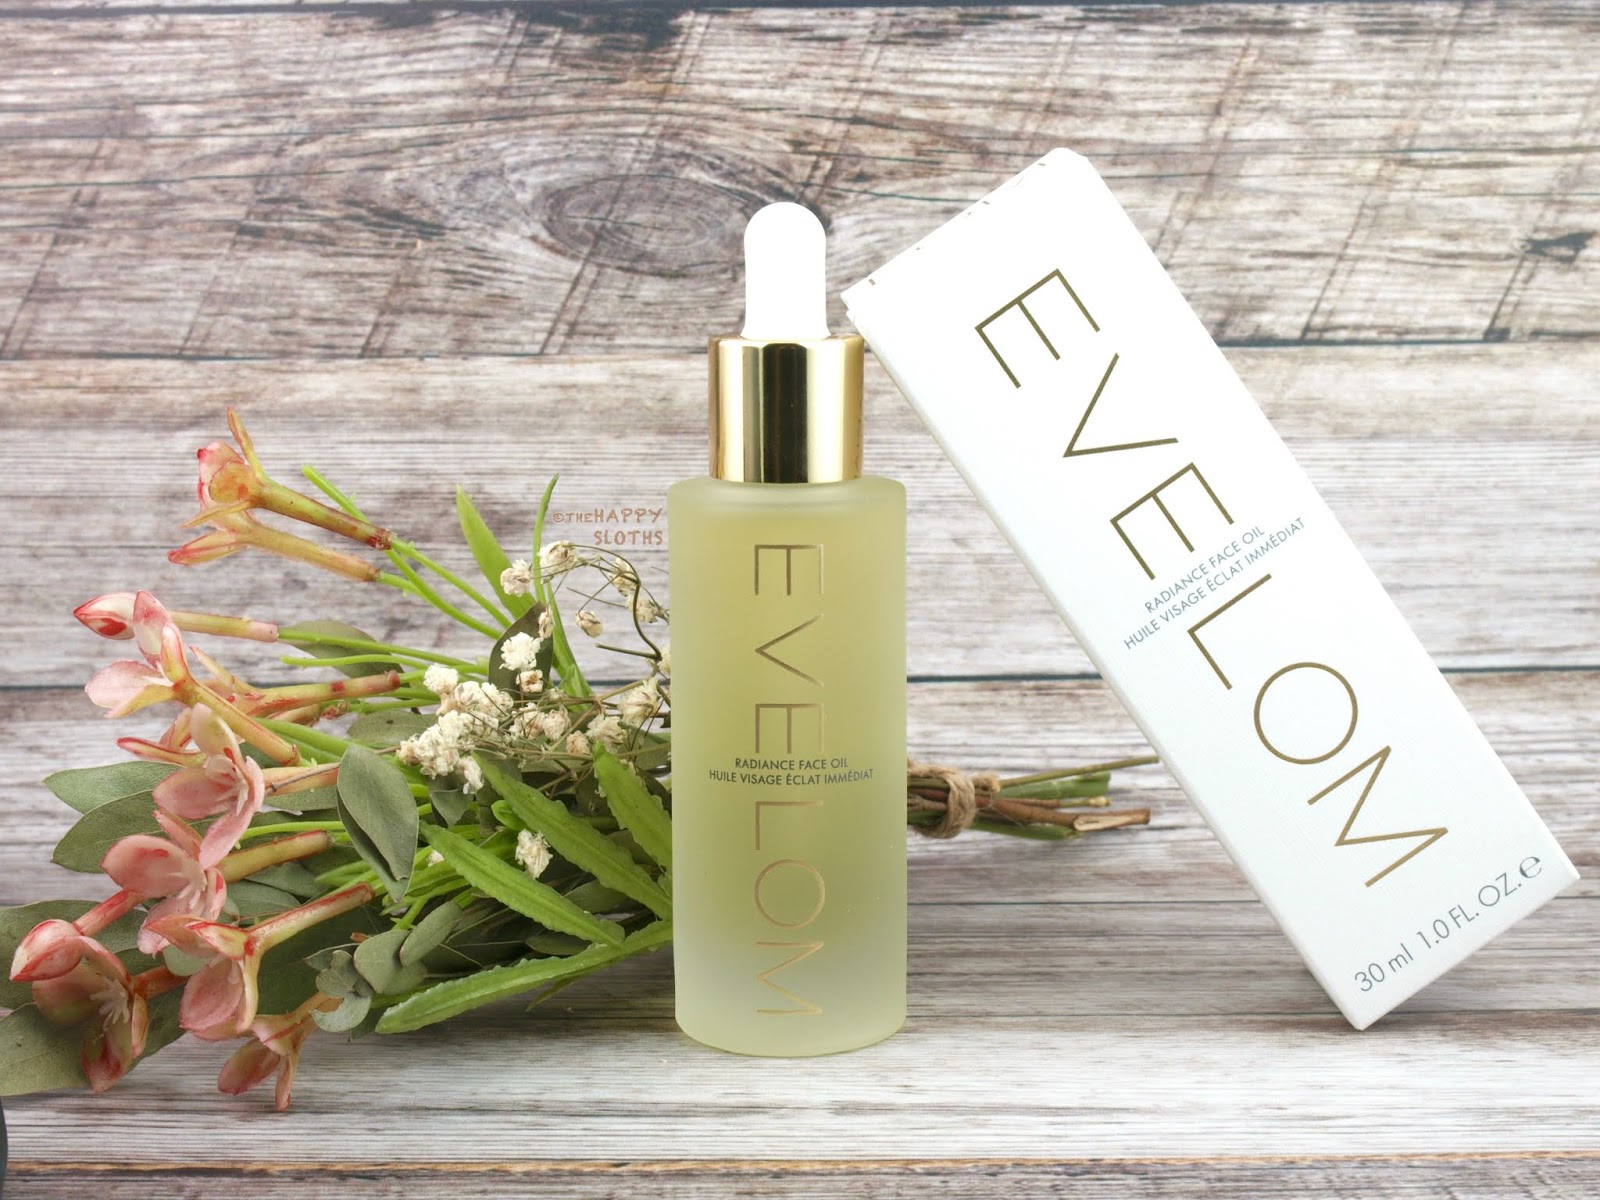 Eve Lom | Radiance Face Oil: Review